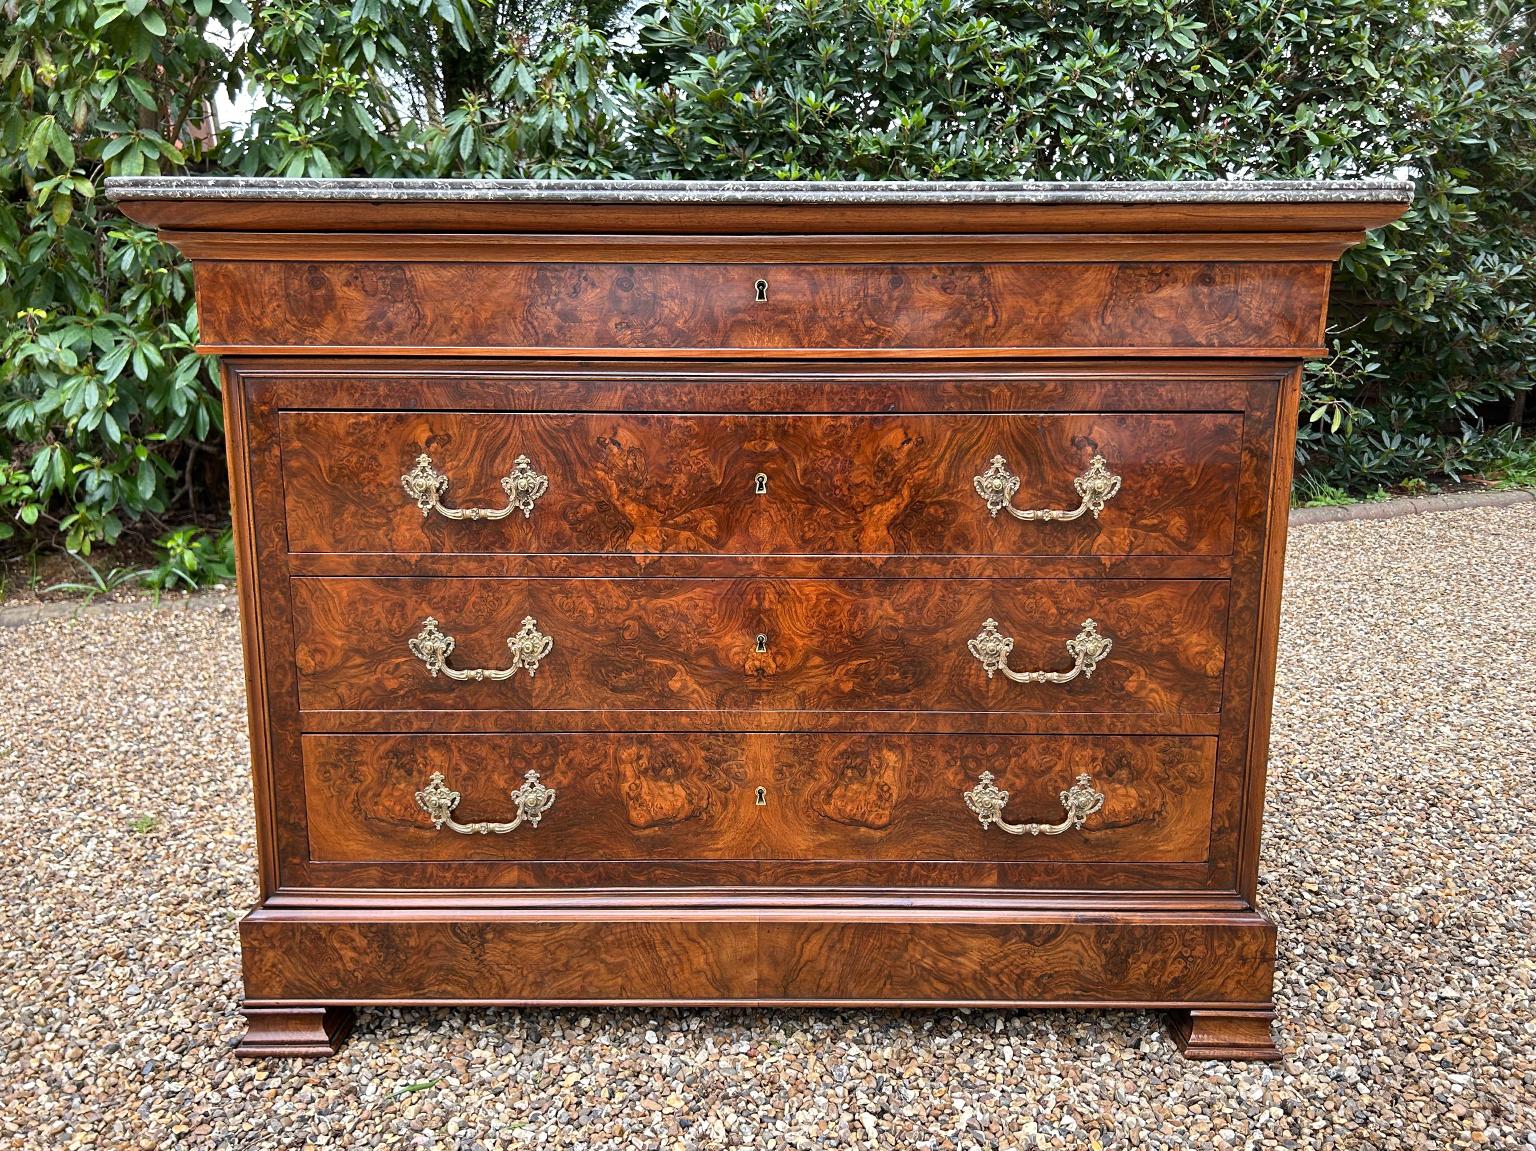 Hand-Crafted 19th Century French Burr Walnut Commode / Chest of Drawers with Marble Top